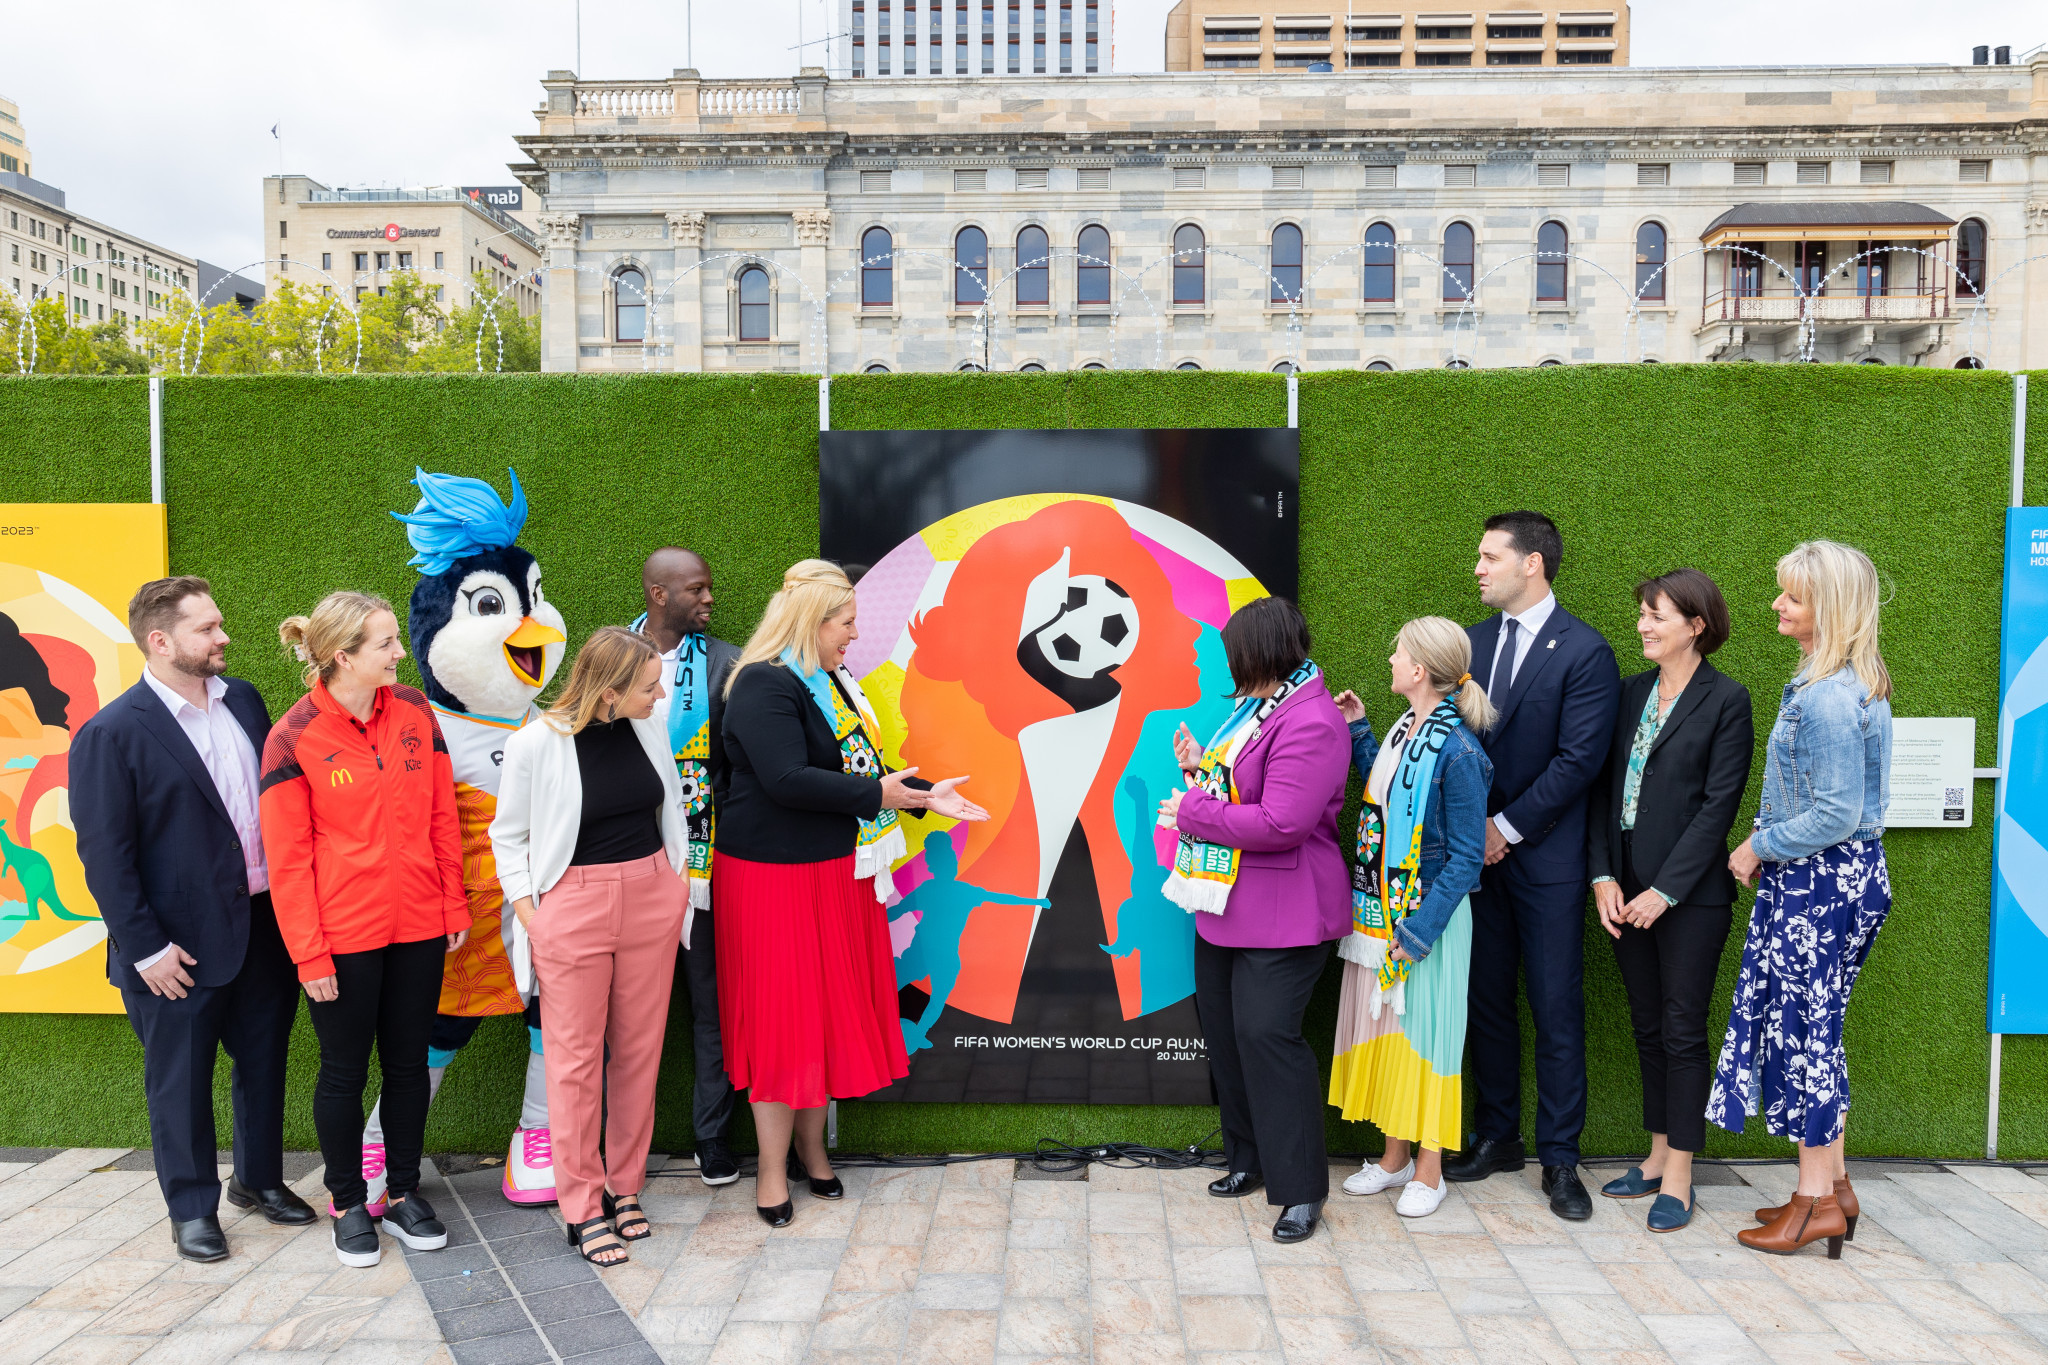 A FIFA Women's World Cup poster is unveiled at an outdoor gallery in Adelaide ©FIFA